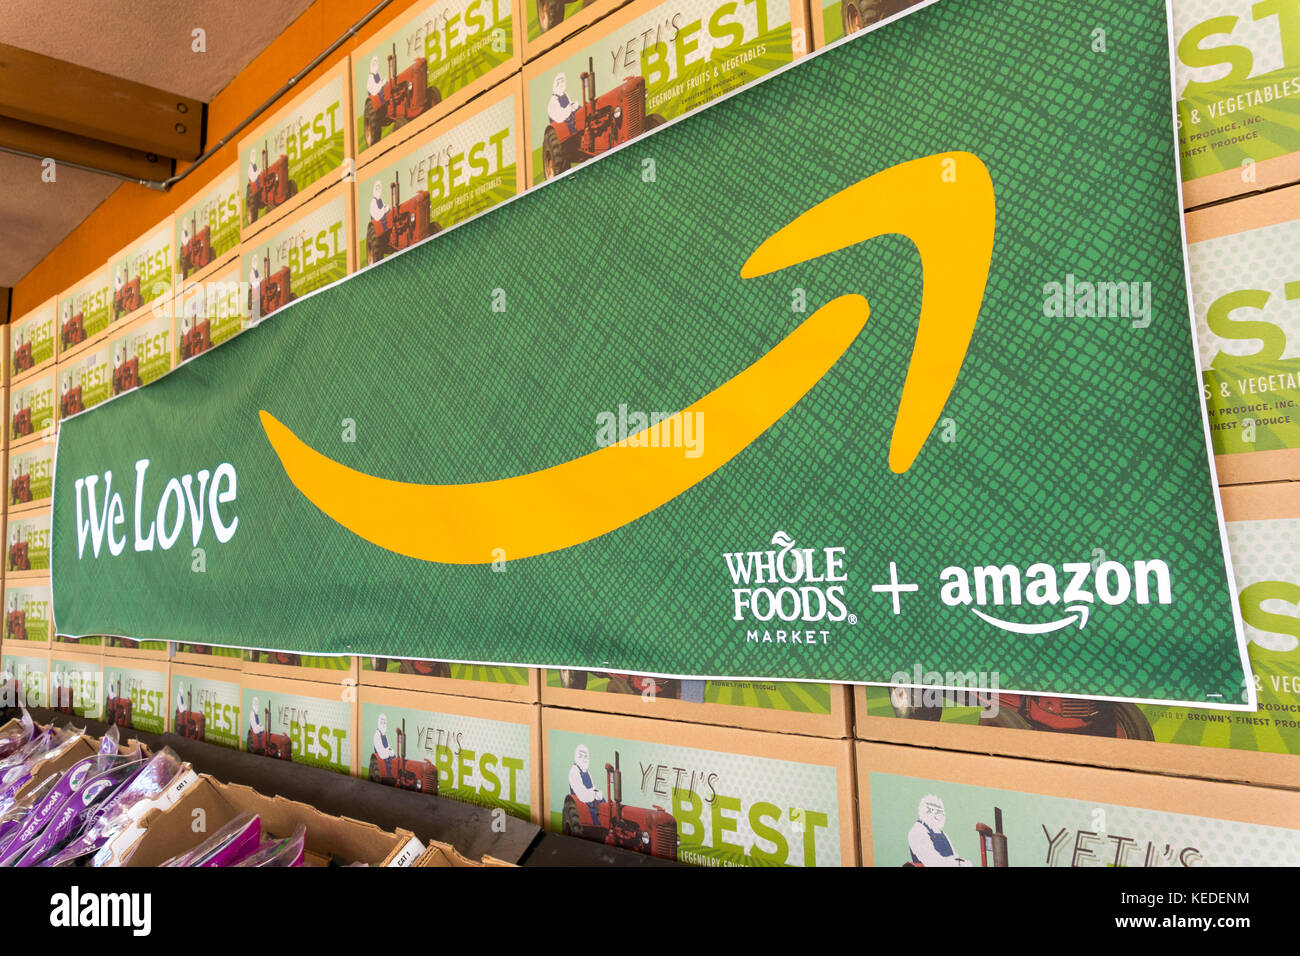 Amazon und Whole Foods in Cupertino Whole Foods Market Store Stockfoto